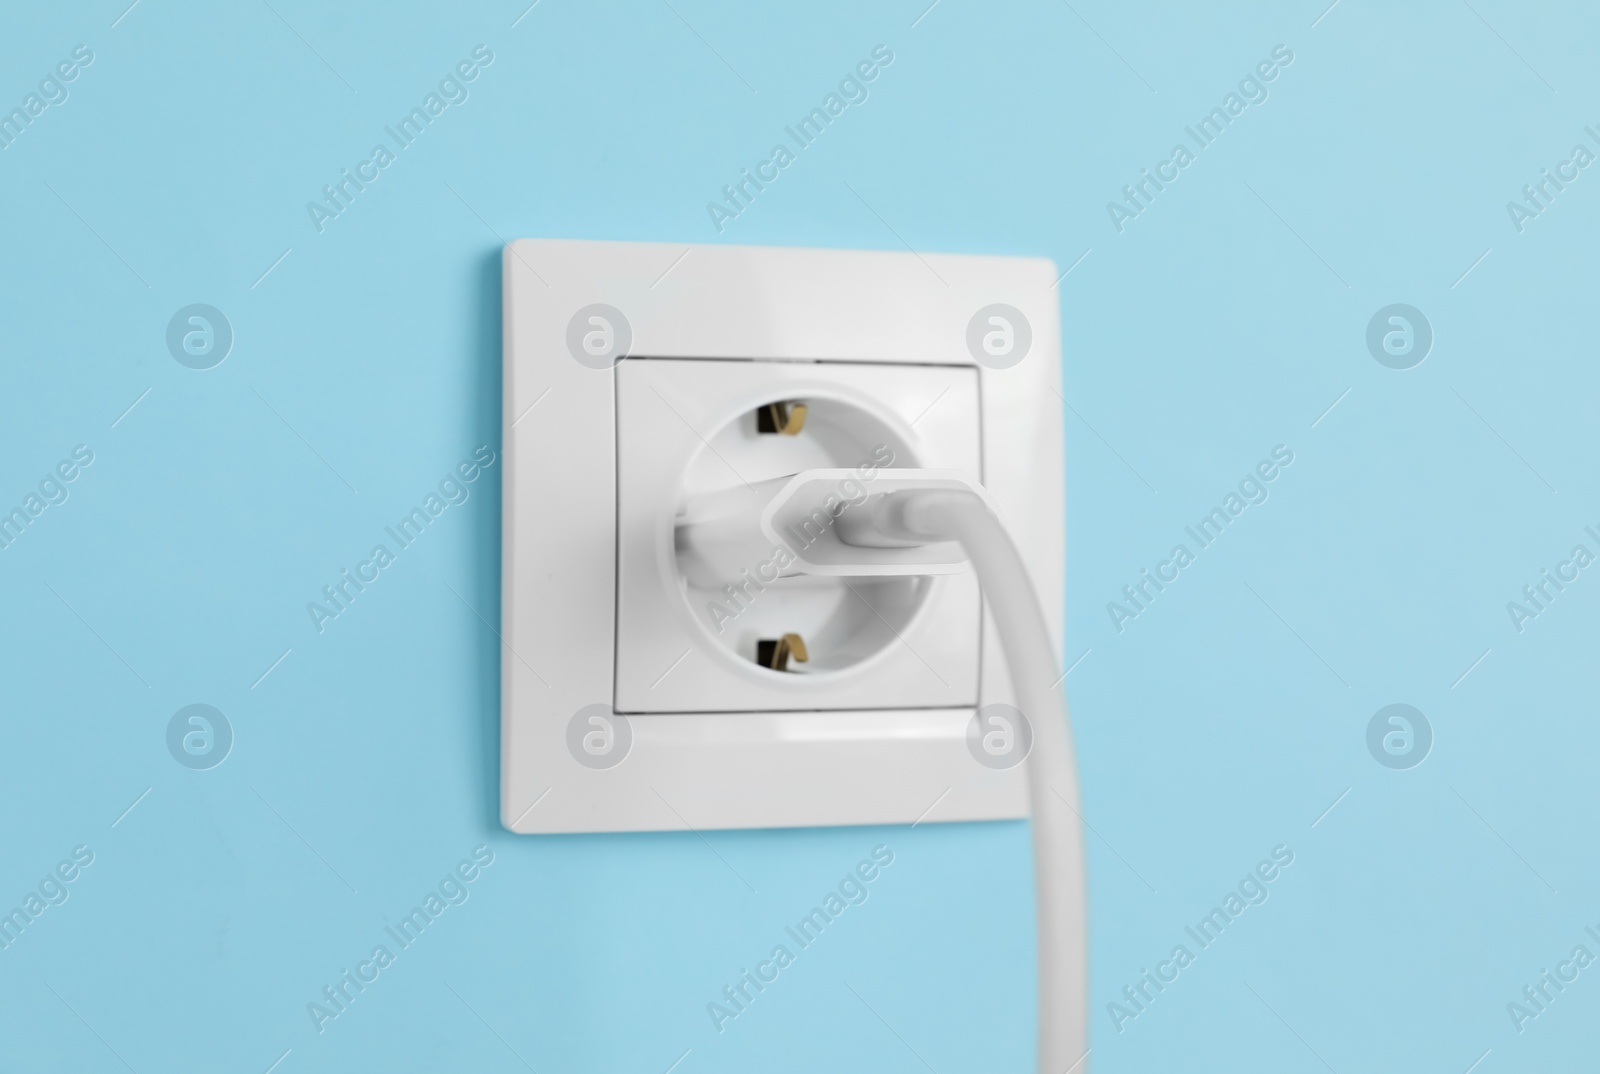 Photo of Charger adapter plugged into power socket on light blue wall. Electrical supply